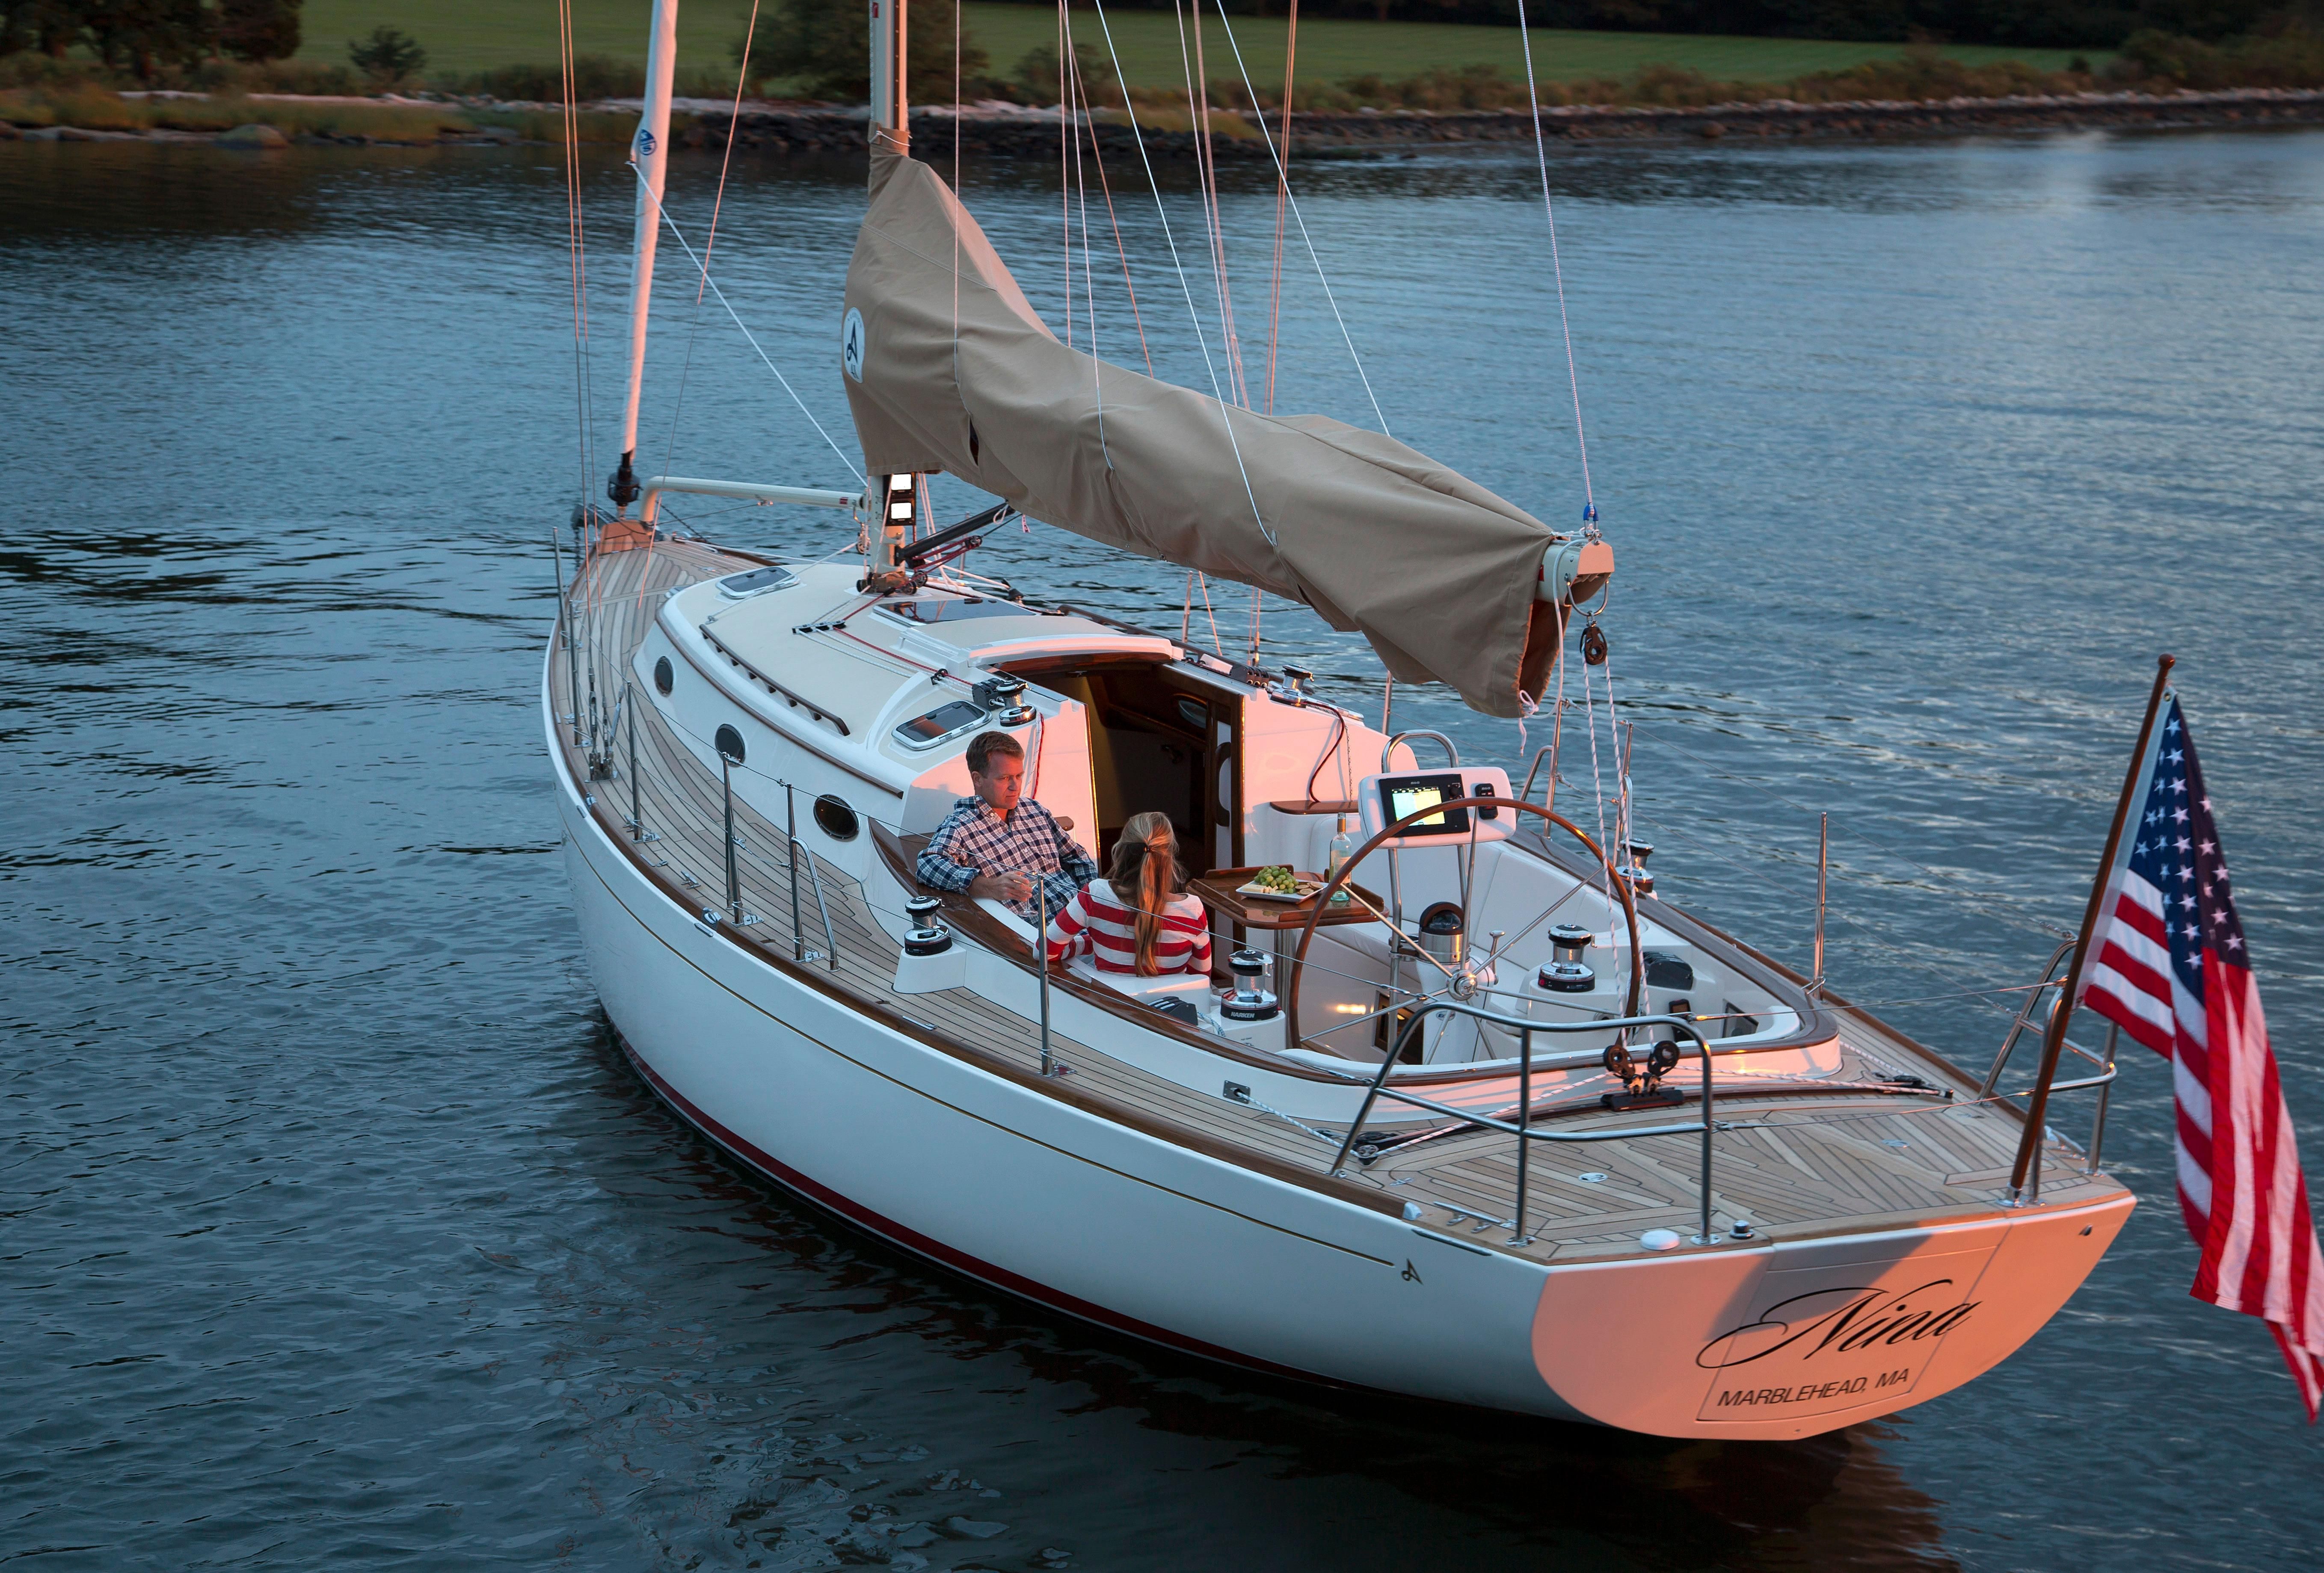 2014 alerion 41 sail boat for sale - www.yachtworld.com